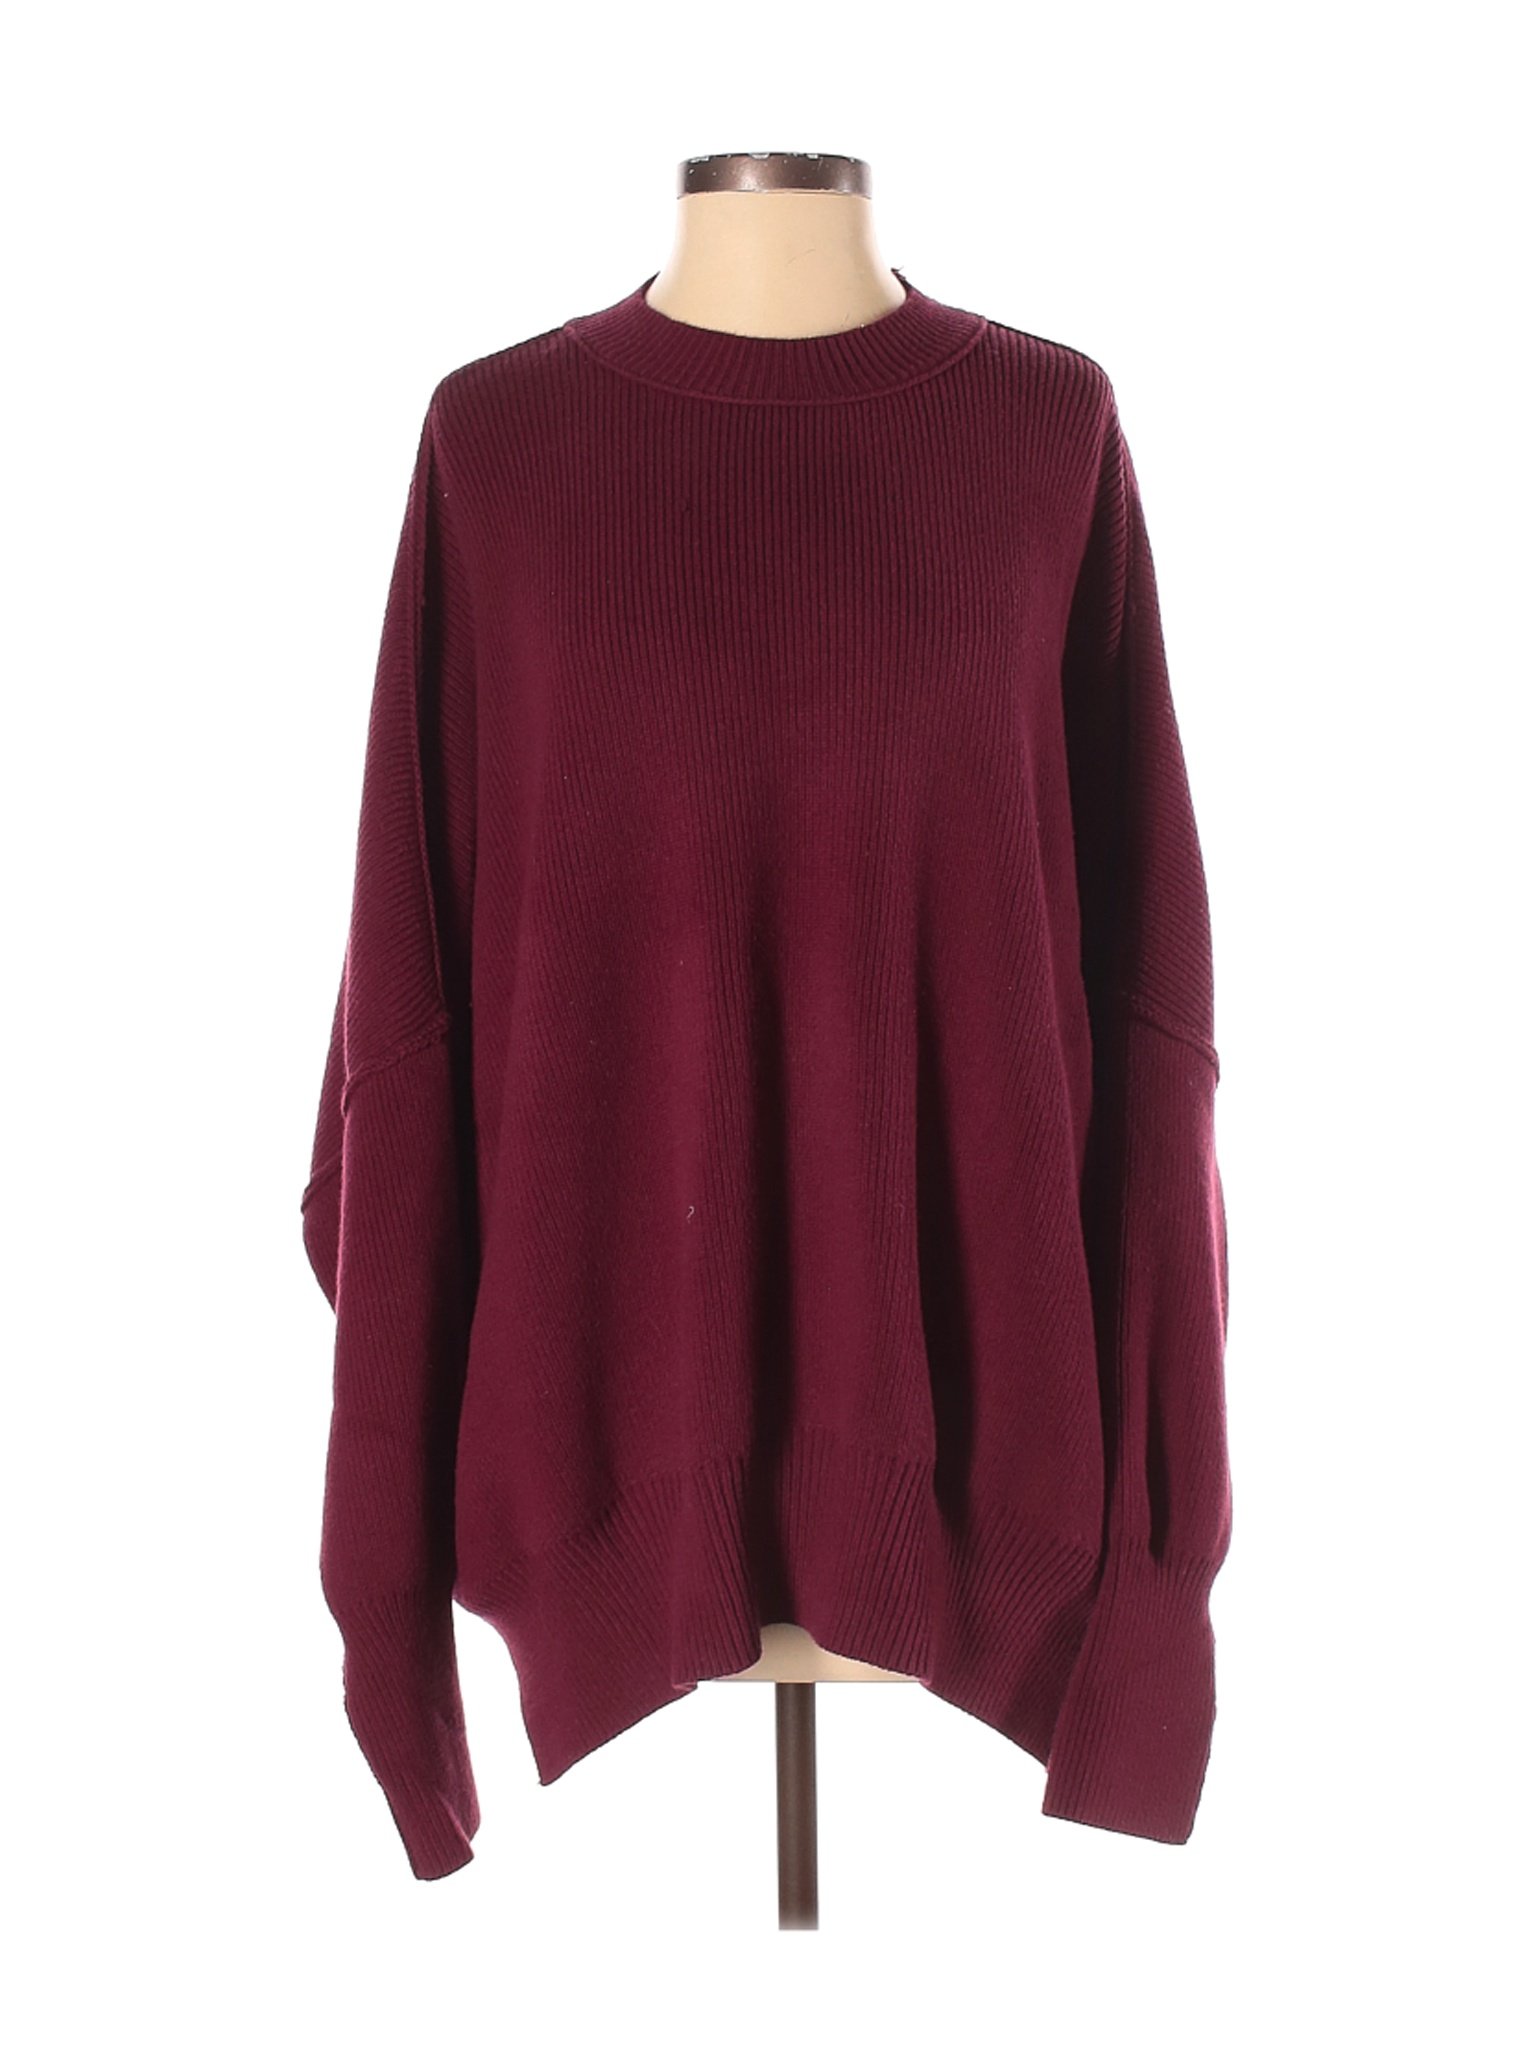 Free People Women Red Pullover Sweater S | eBay